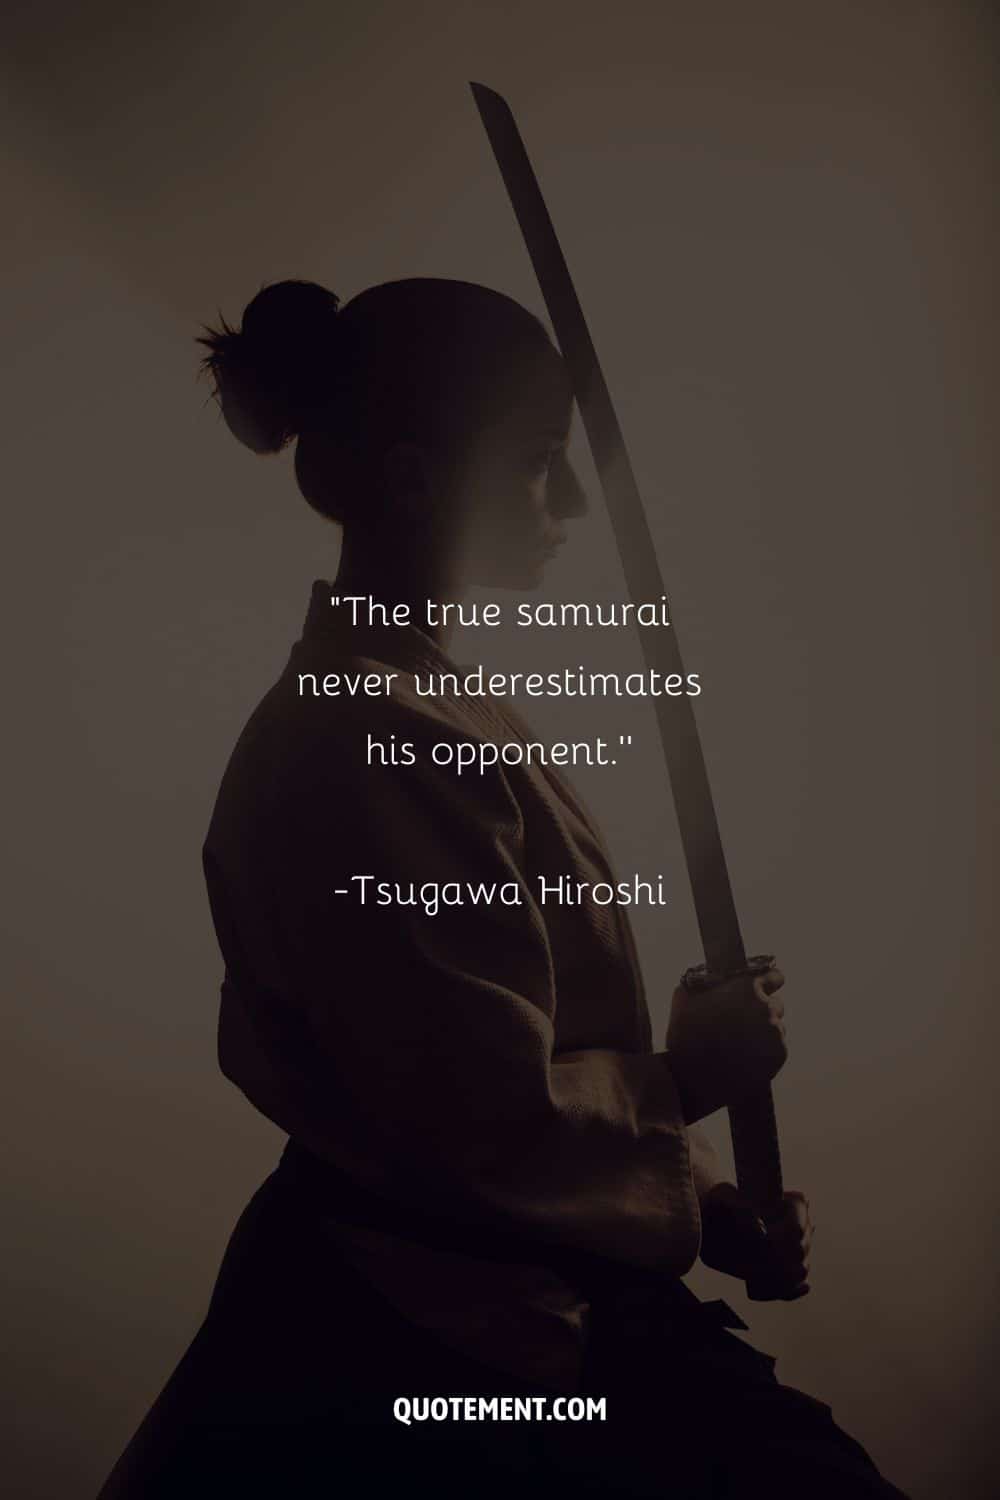 female samurai with katana leaning on her head representing warrior death quote